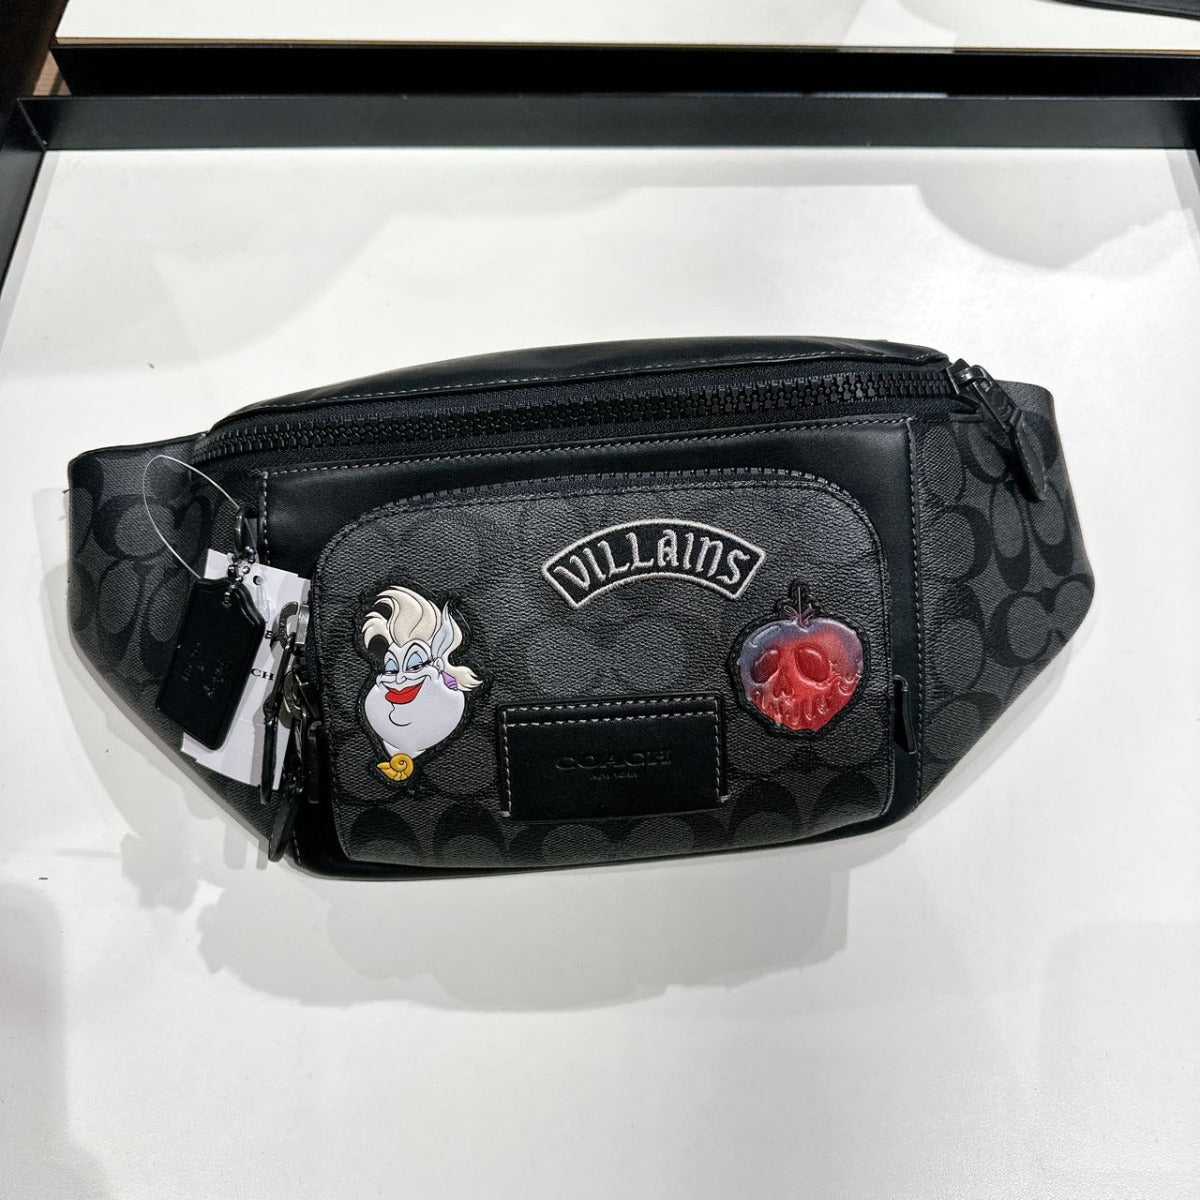 Coach CC038 Disney X Coach Track Belt Bag With Patches In Gunmetal/Charcoal/Black Multi